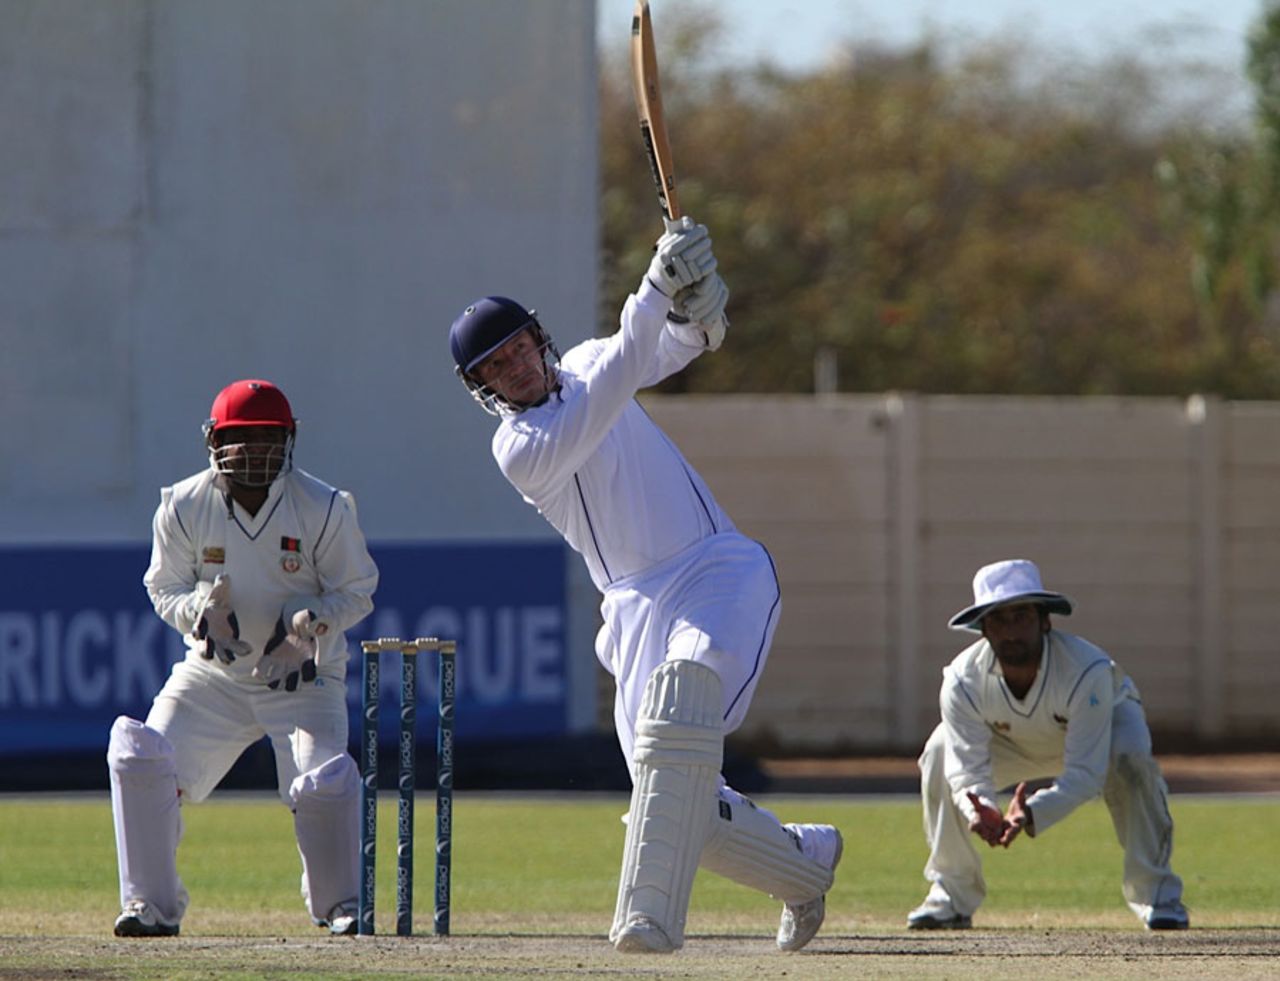 Sarel Burger top scored for Namibia with 44, Namibia v Afghanistan, ICC Intercontinental Cup, 3rd day, Windhoek, August 6, 2013